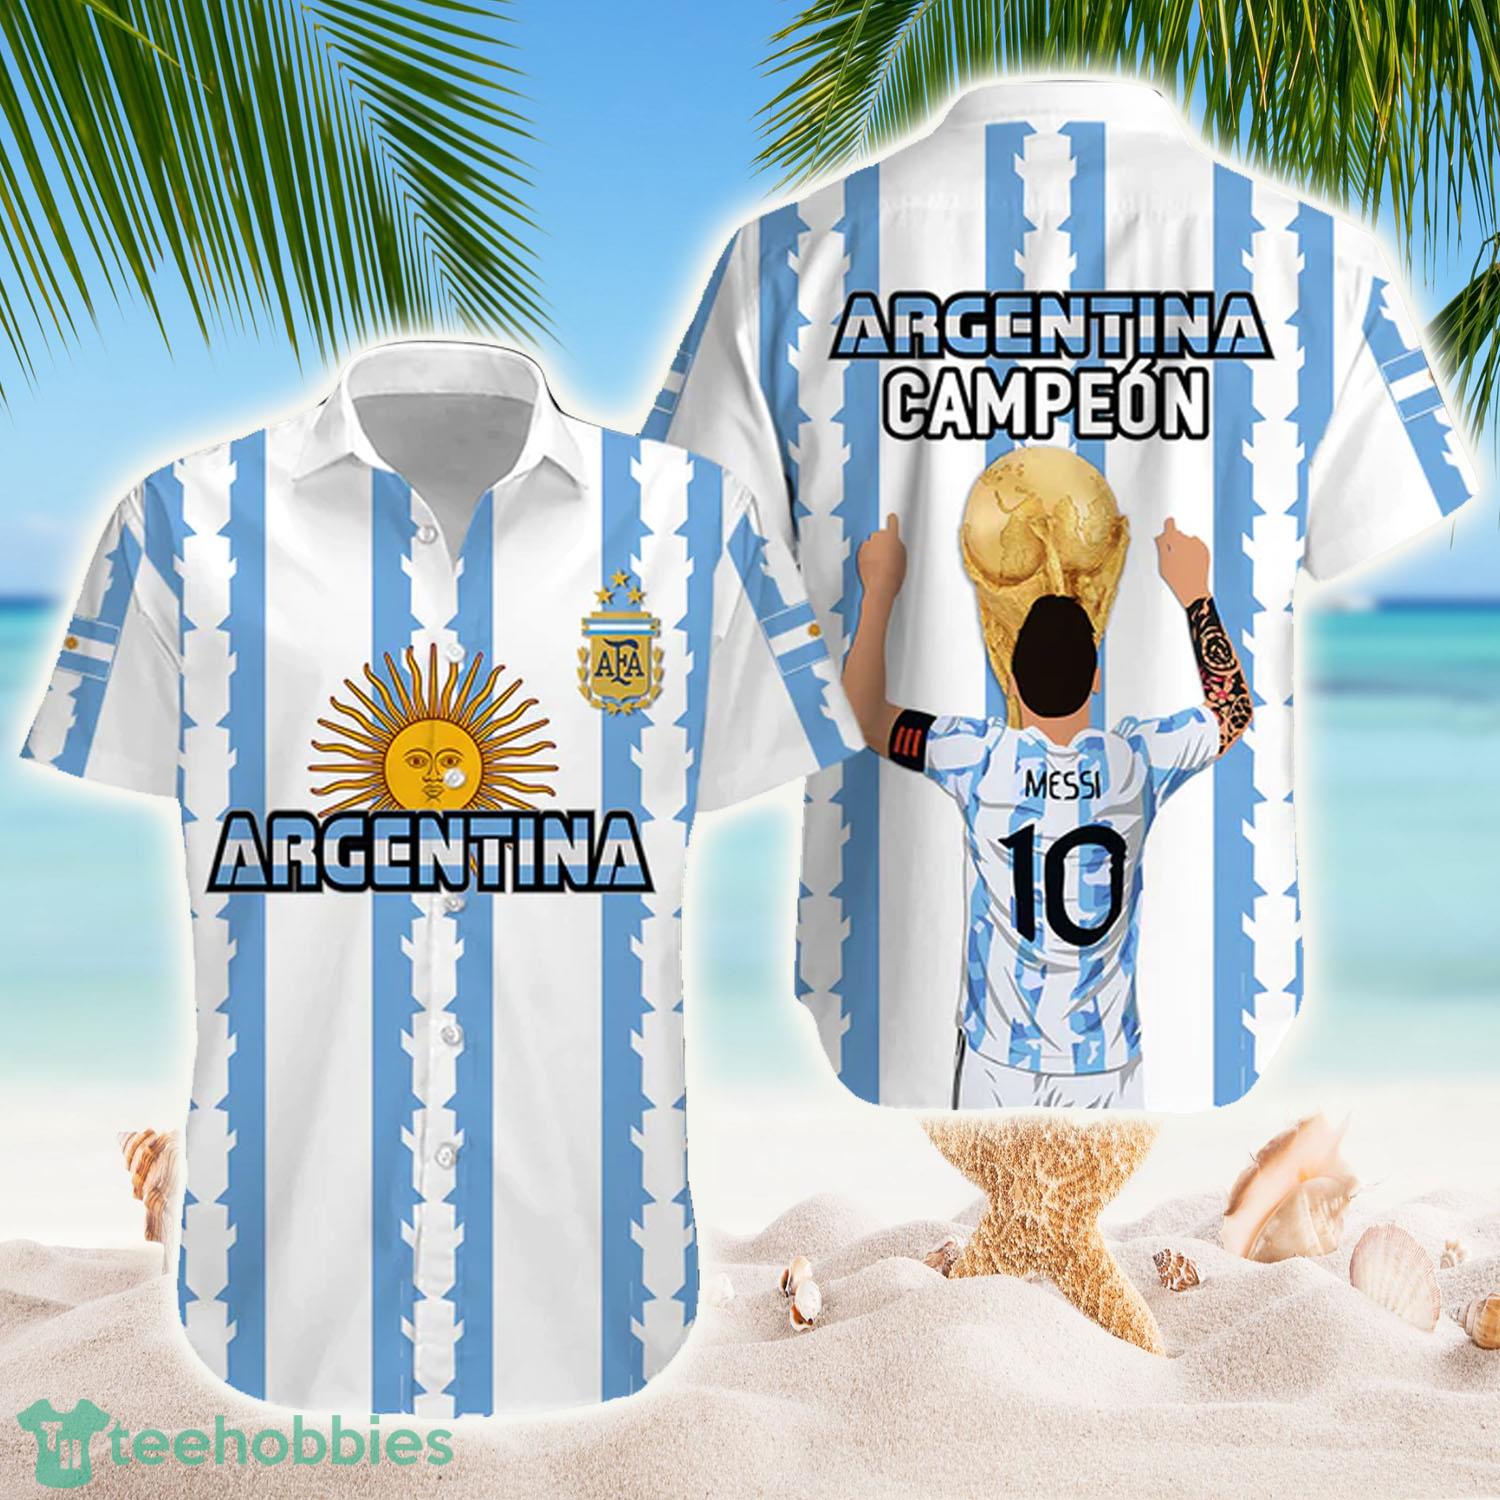 Argentina Football Campeon World Cup 2022 Pride 10 Hawaiian Shirt - Argentina Football Campeon World Cup 2022 Pride 10 Hawaiian Shirt